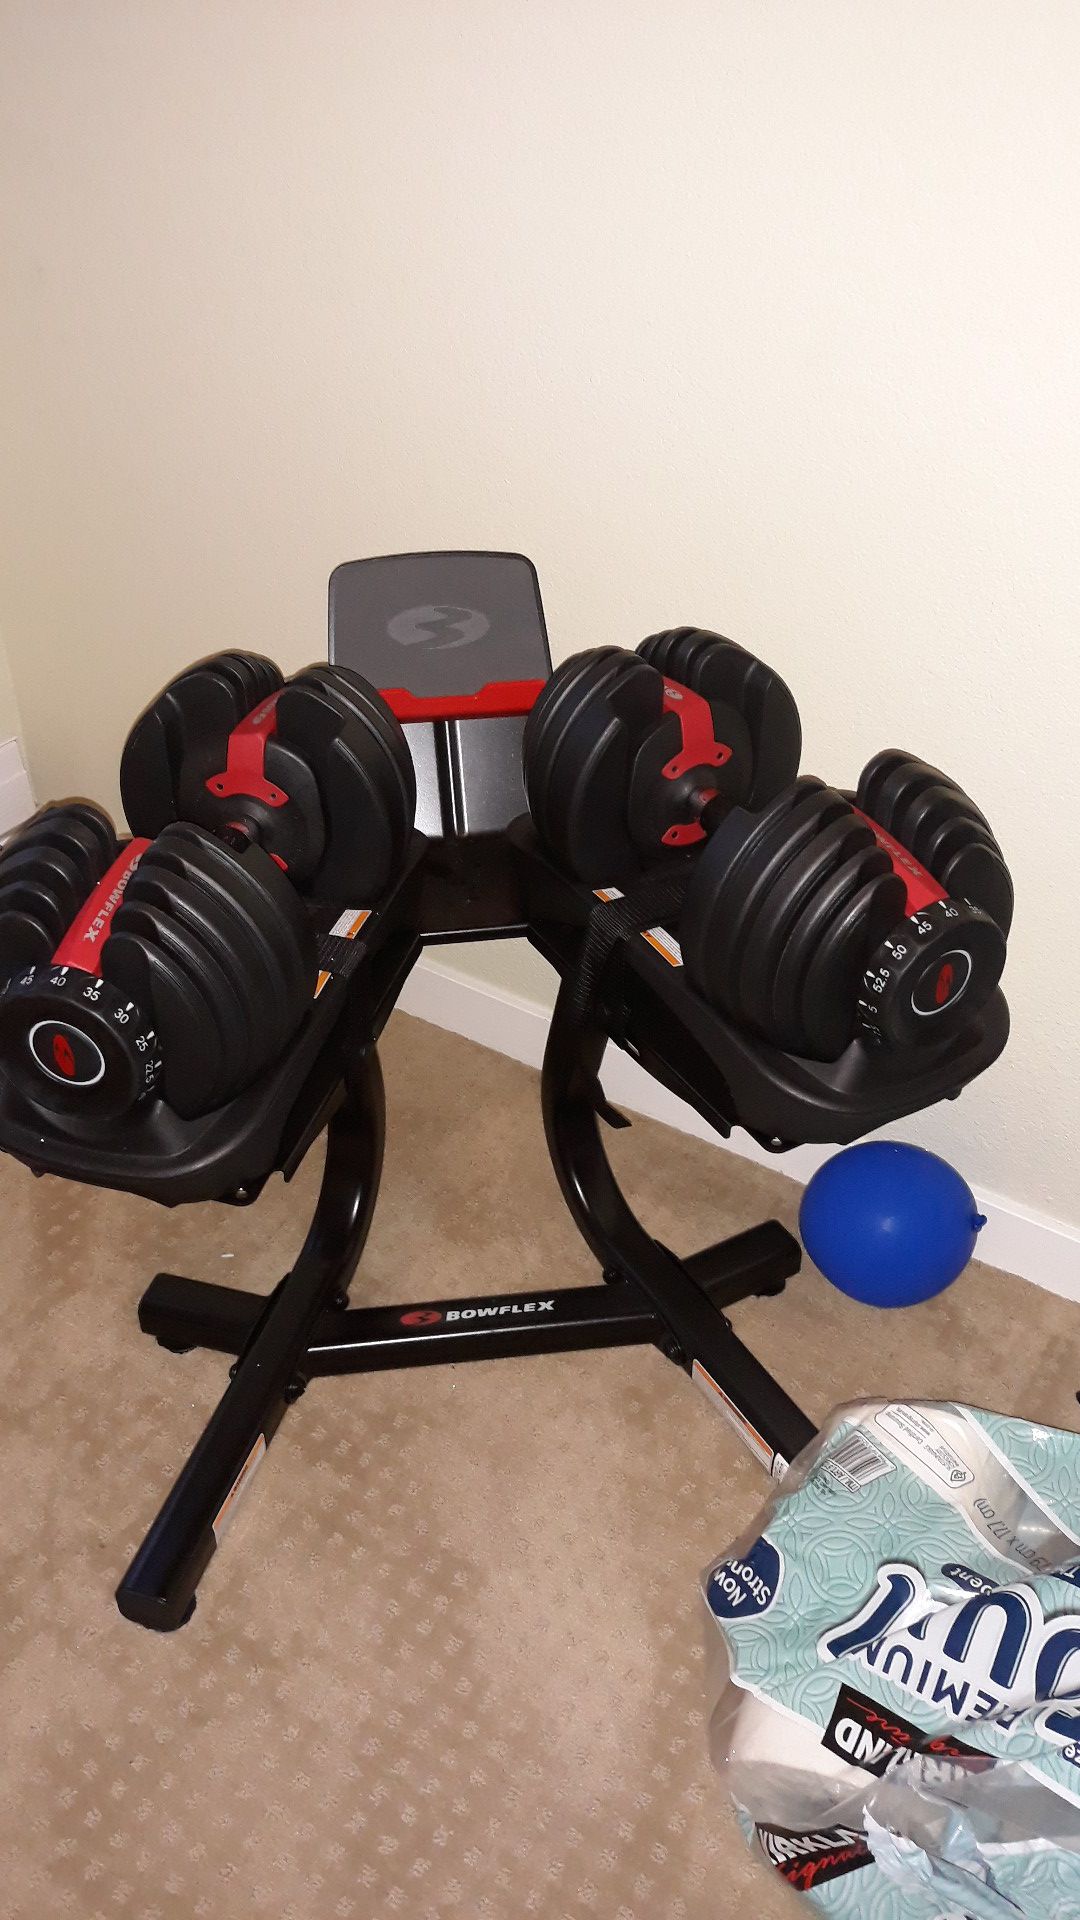 Bowflex dumbbells 552lbs with stand and bench. Excellent condituons